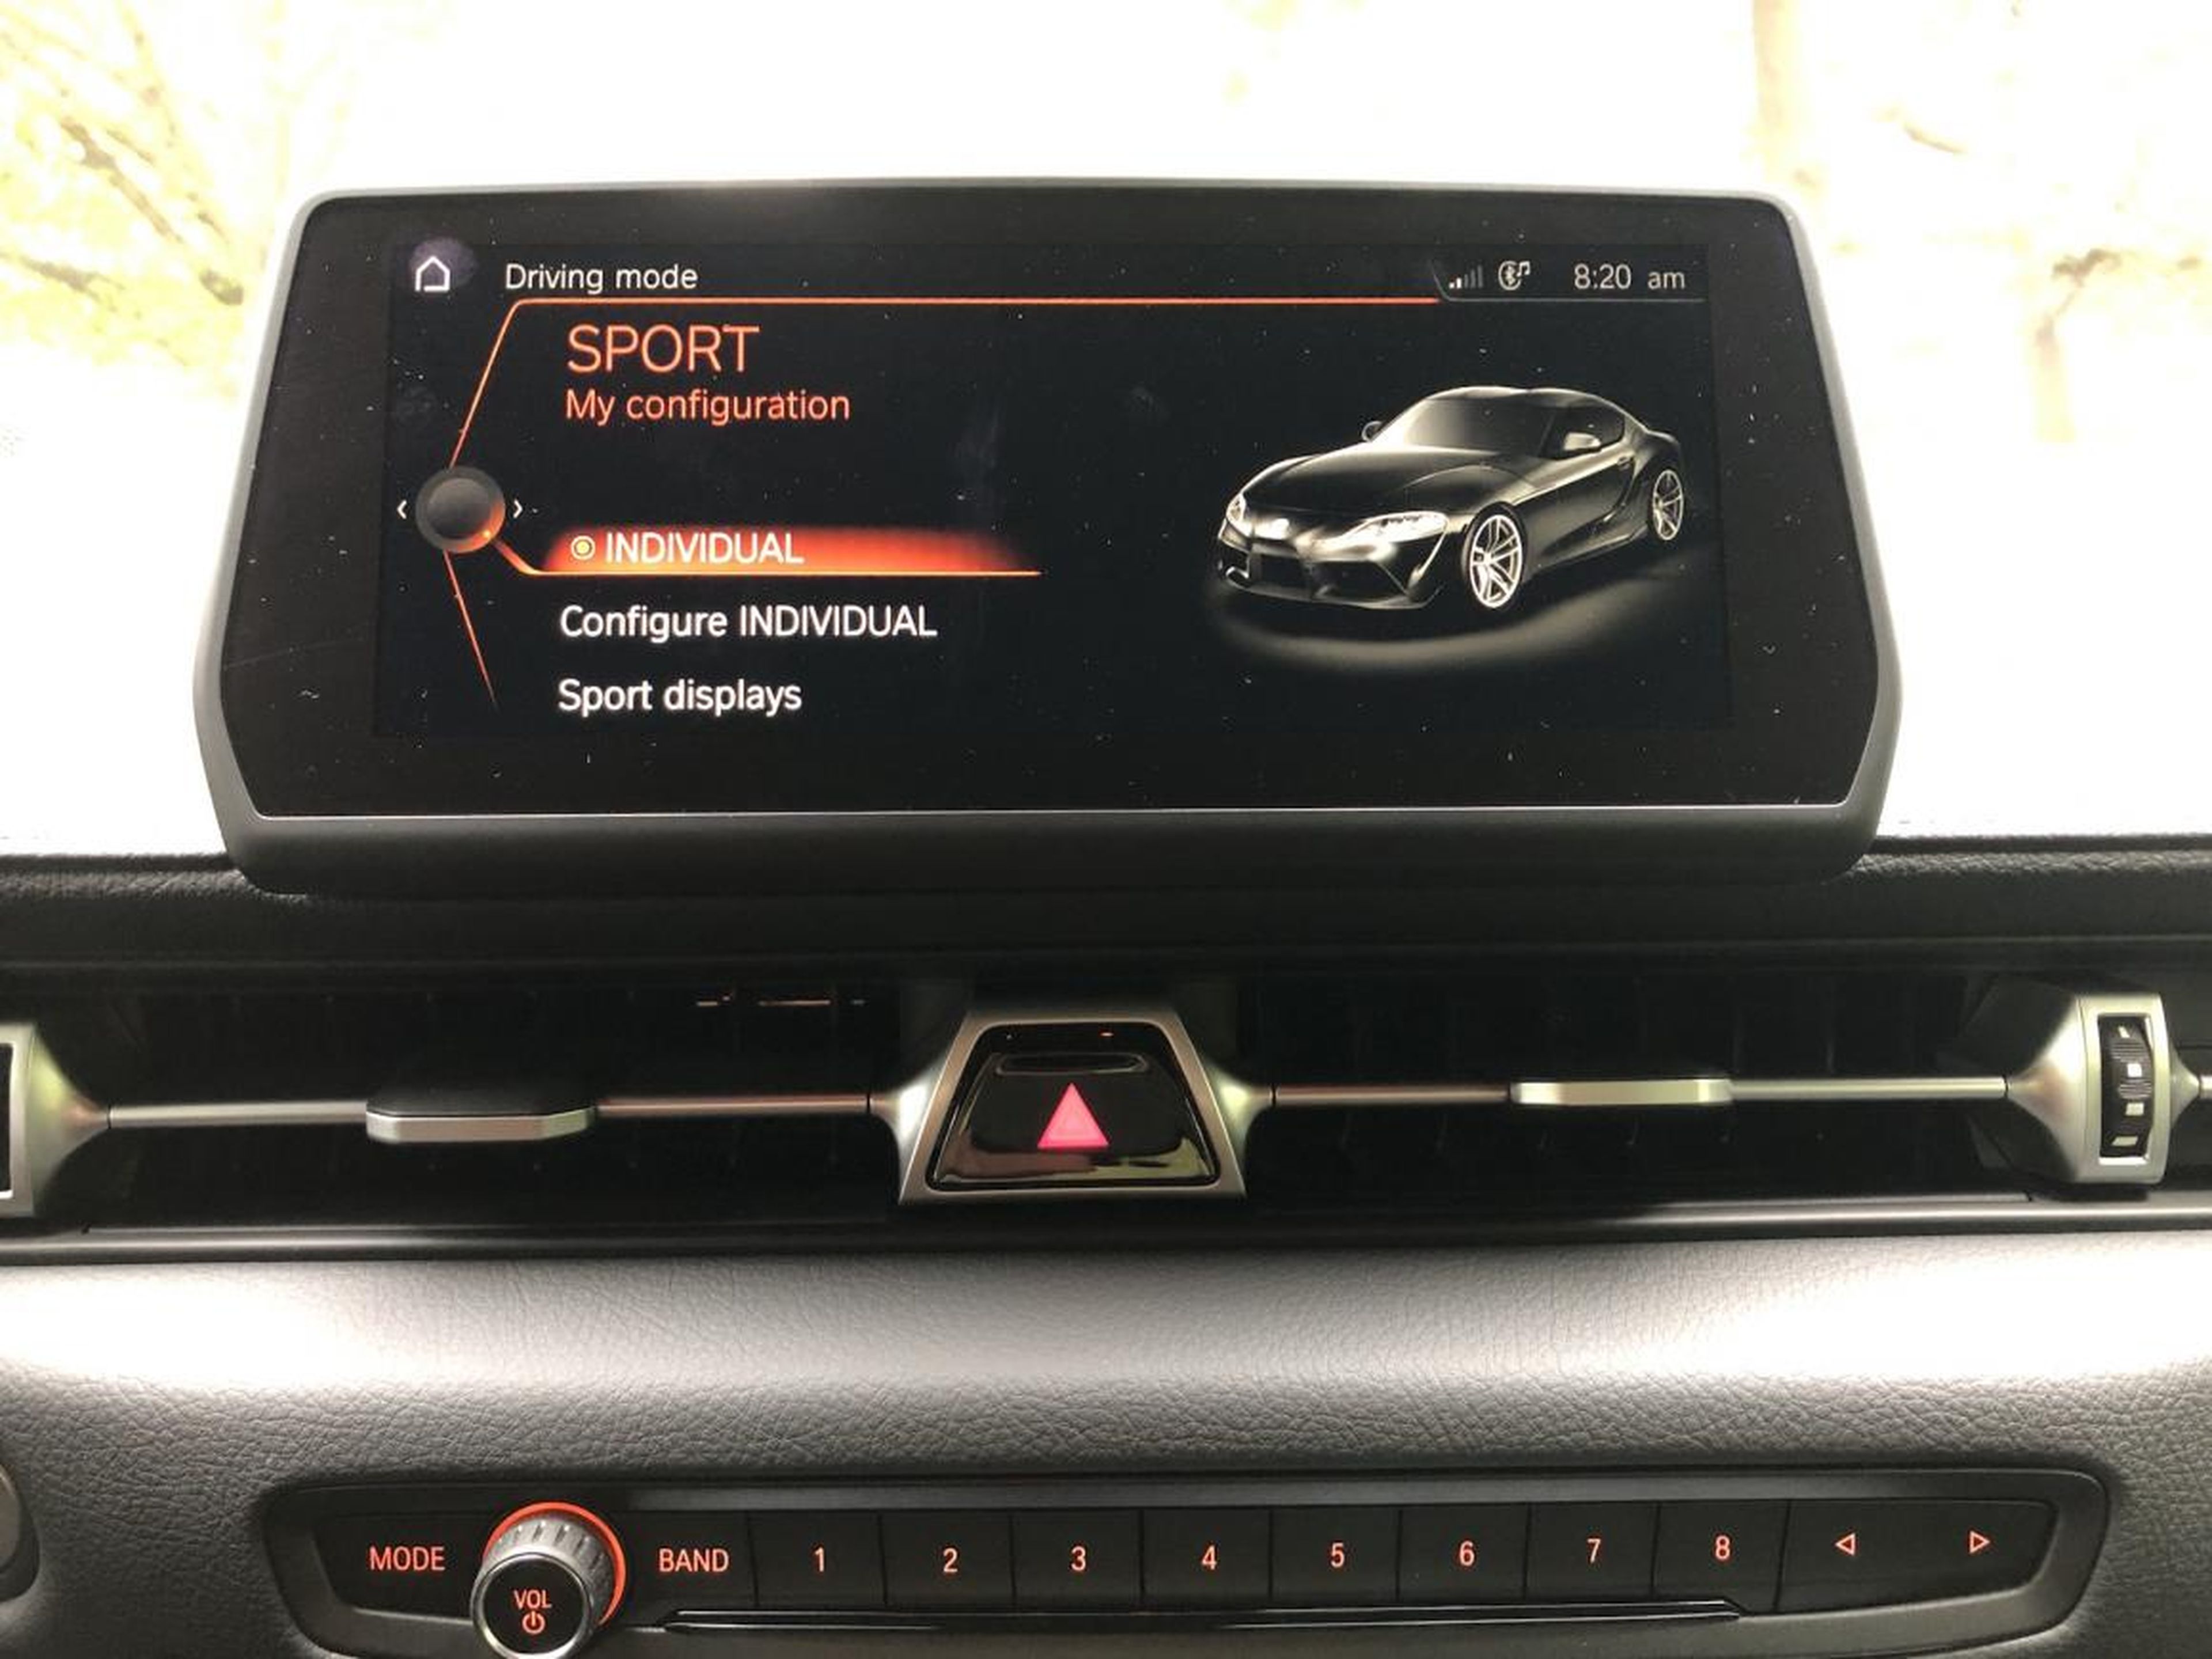 Compared to the Z4's drive settings, the Supra's are easier to deal with. You basically have normal and sport, with some options for customization. The Supra really comes alive in sport mode.